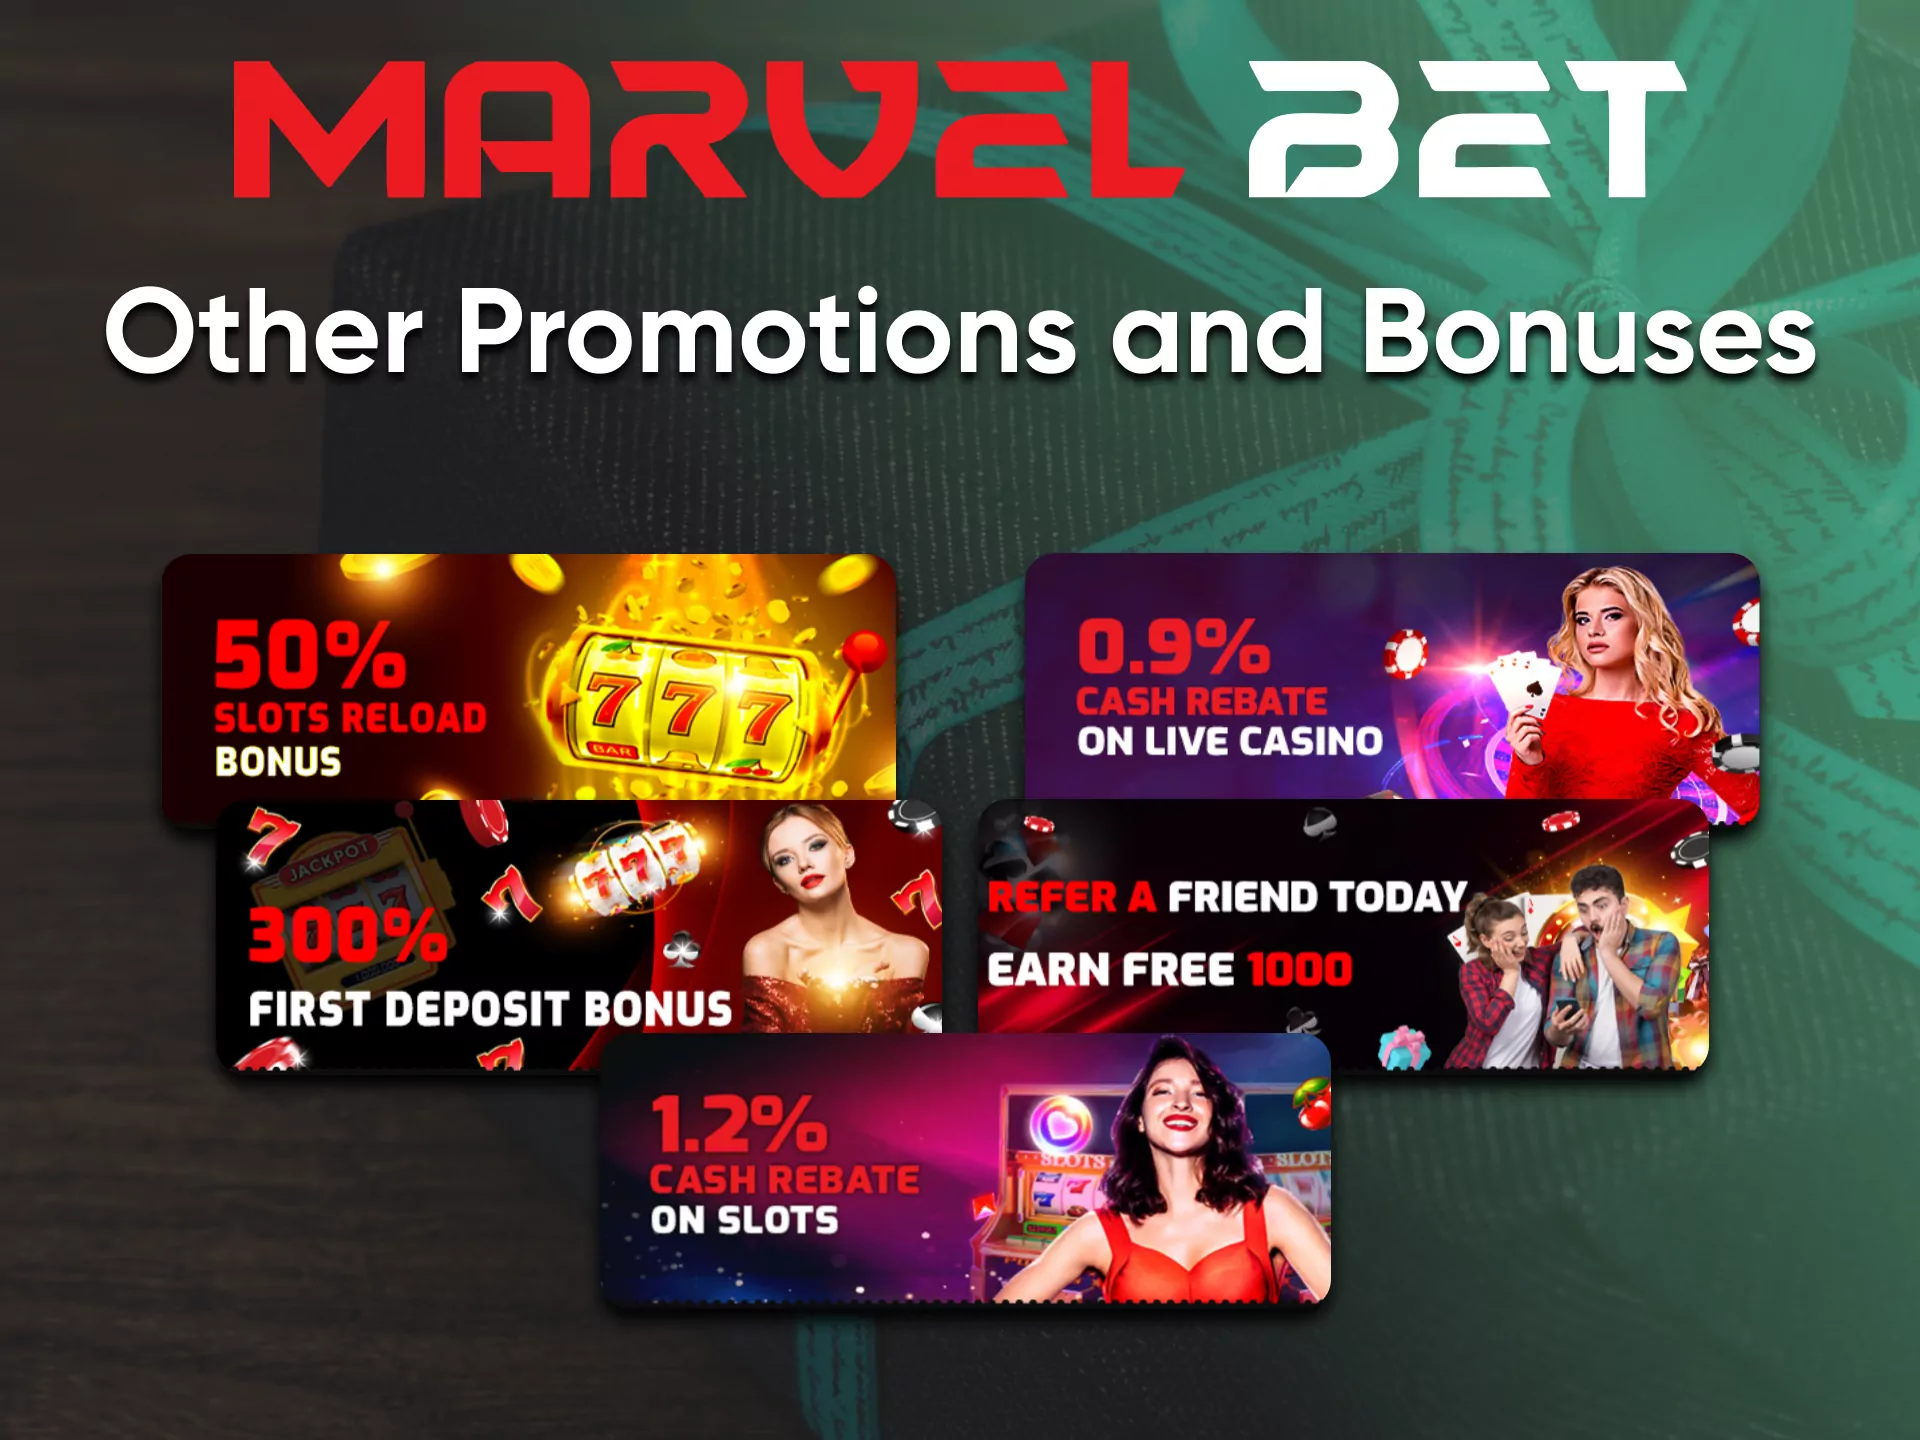 Play at the casino for extra bonuses from Marvelbet.